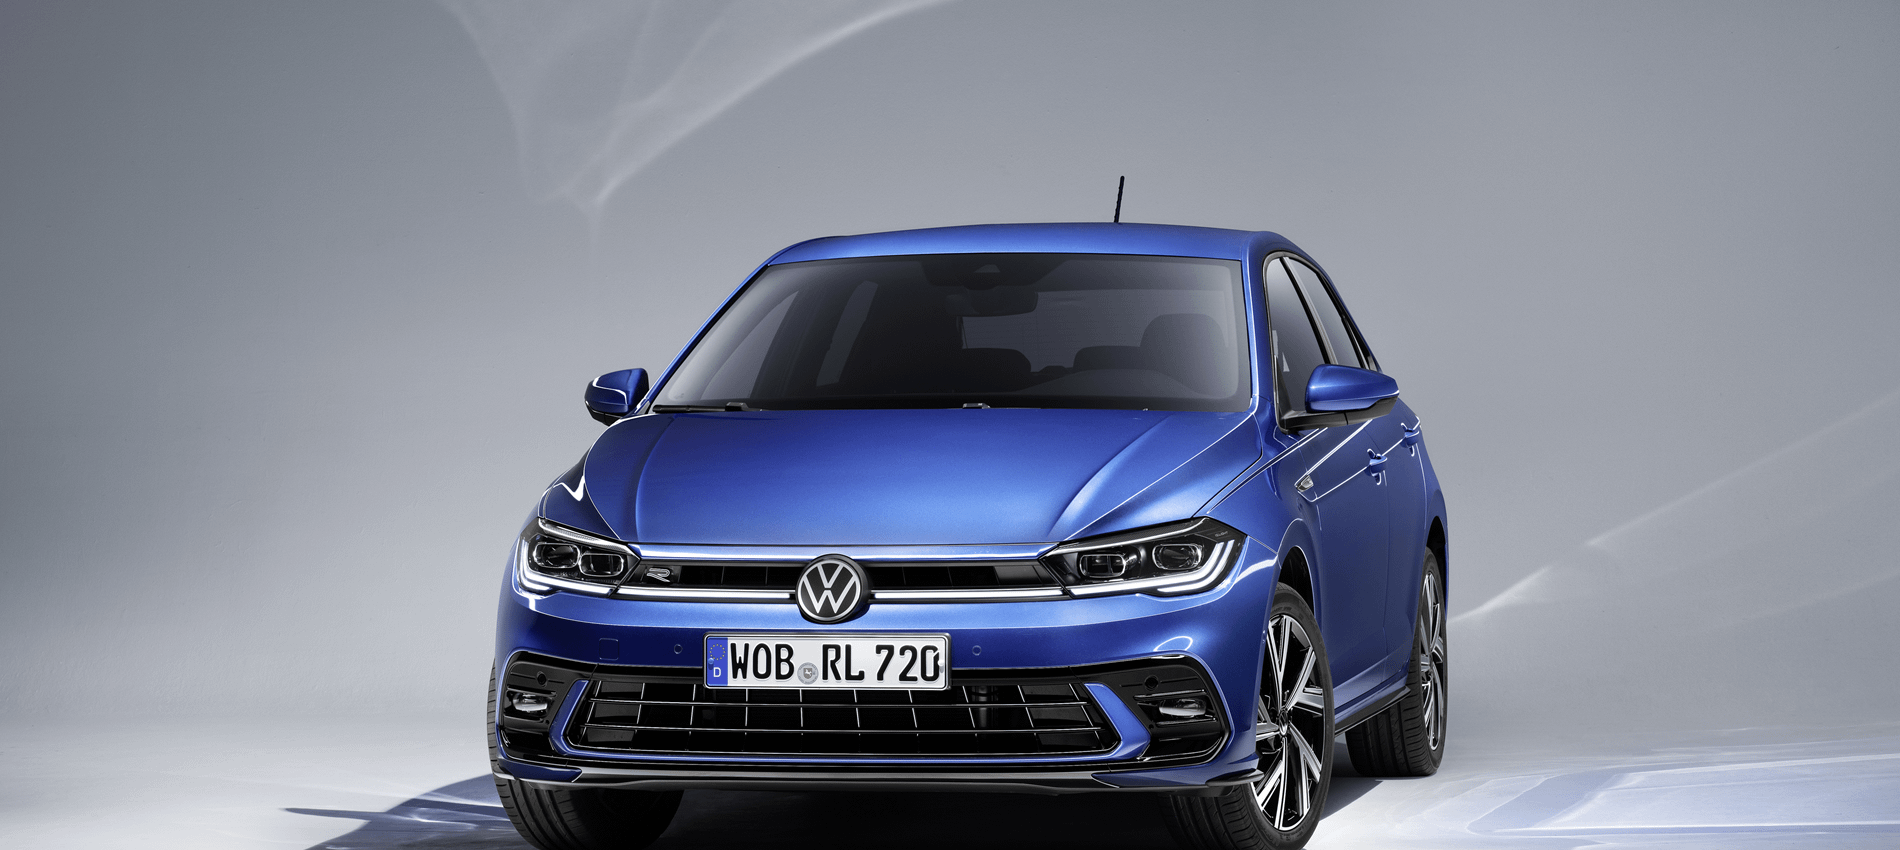 Introducing the Polo GTI Edition 25